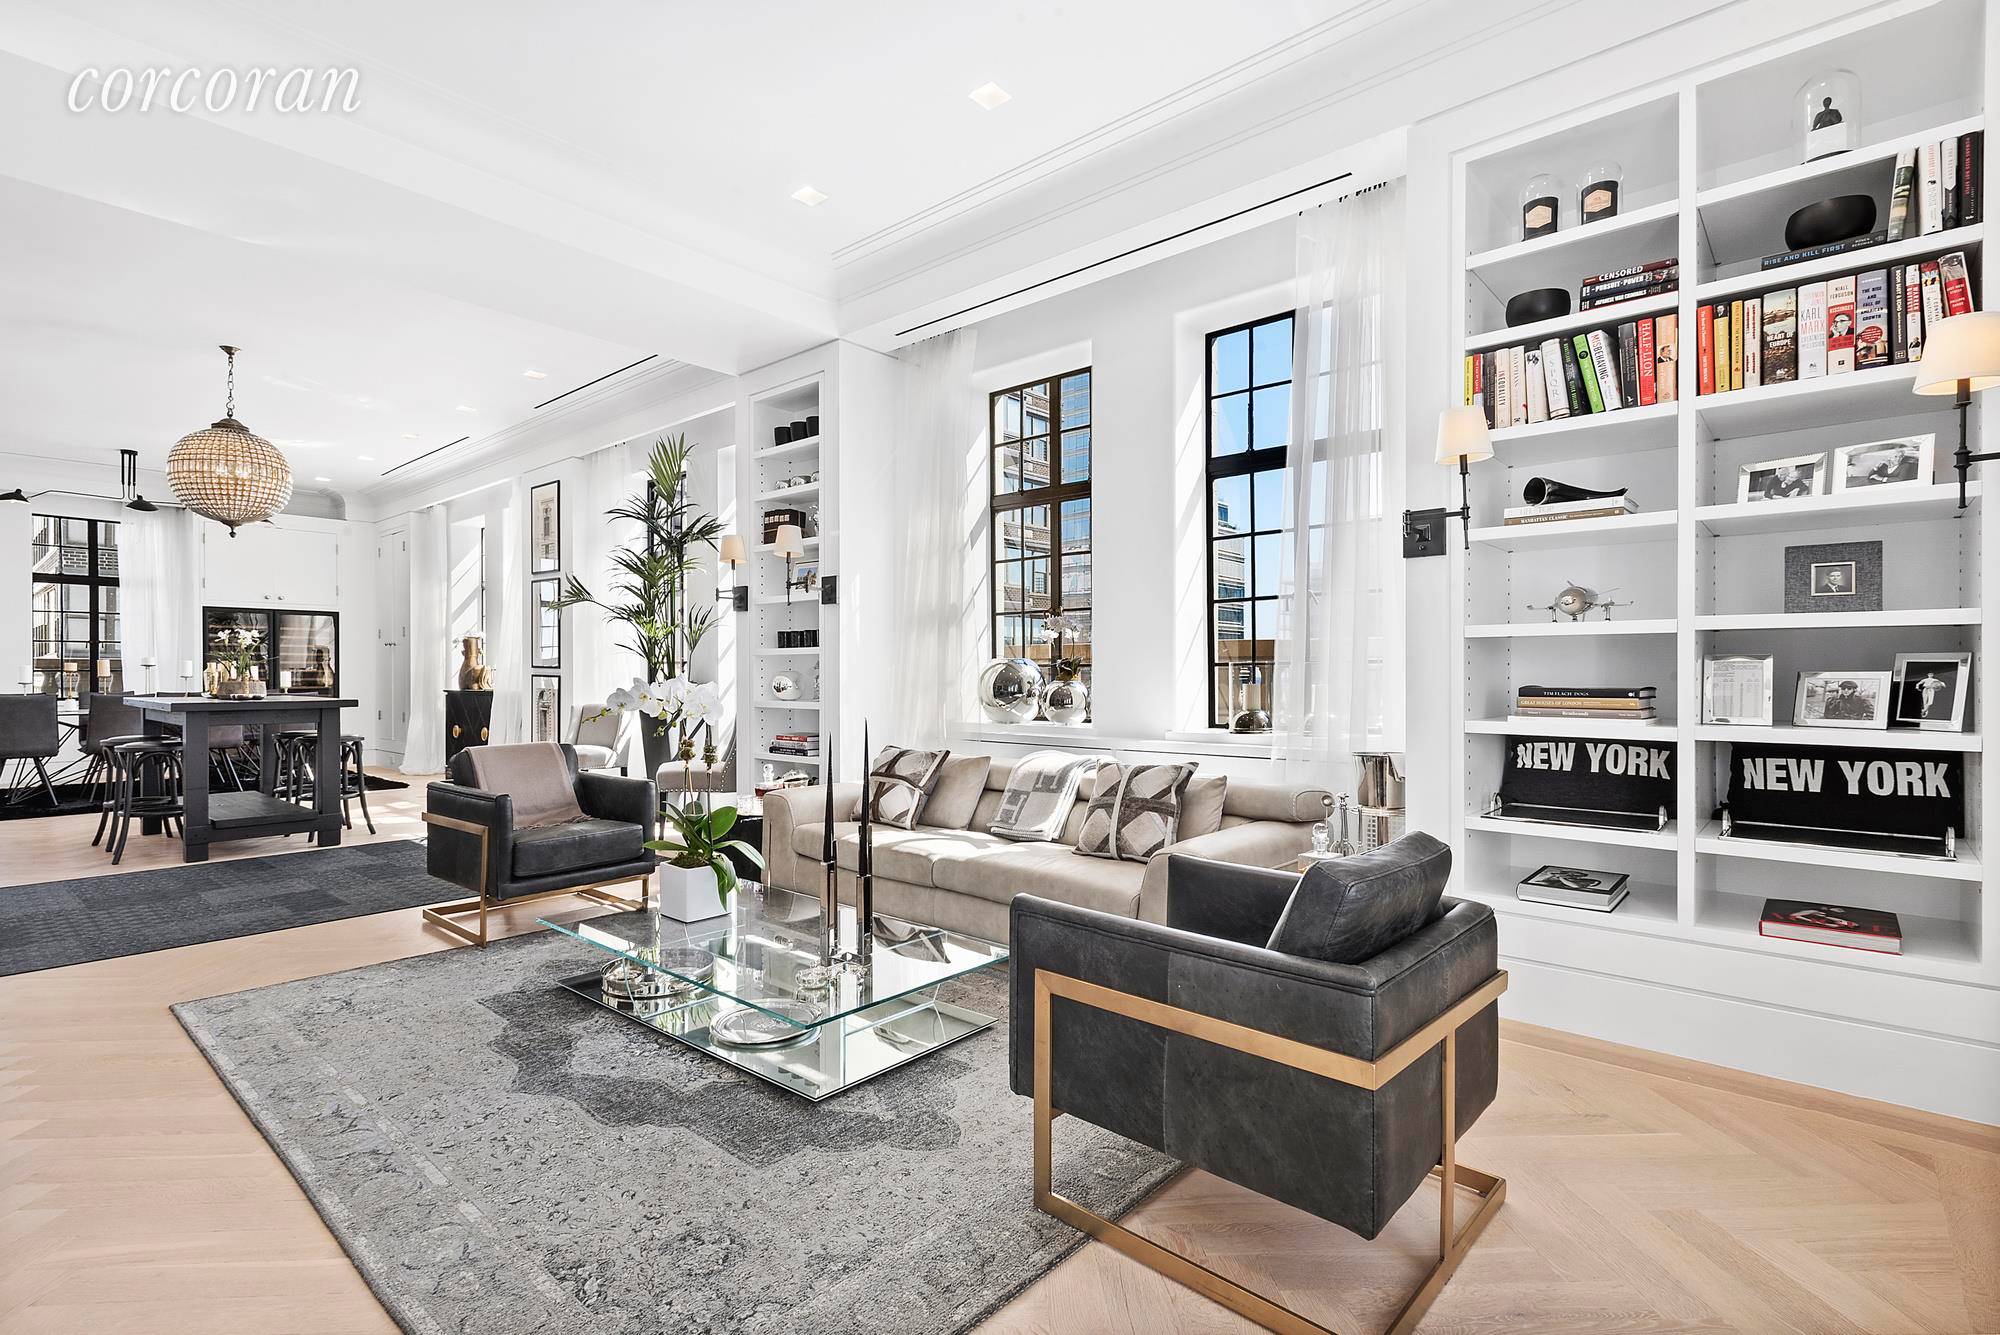 This elegantly designed, one of a kind full floor, prewar home on the 35th Floor of The Ritz Tower residence at Park Avenue and 57th Street is a celebritys dream ...